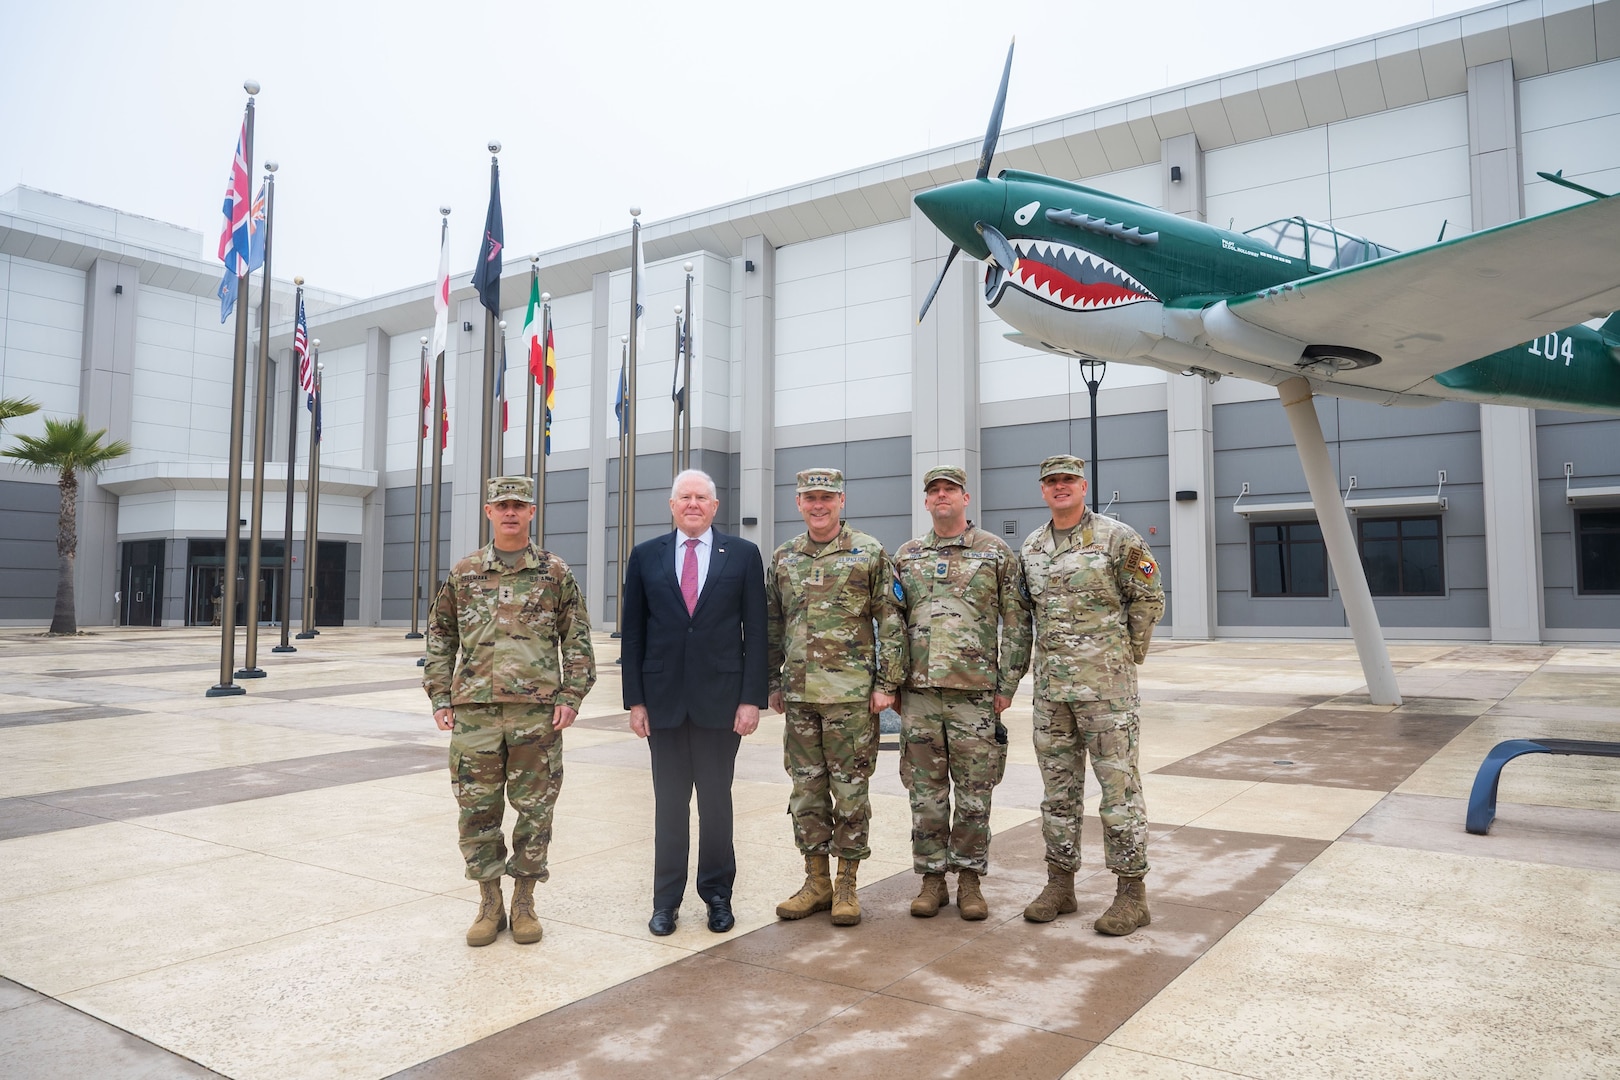 Five gentlemen, four in military uniform and on in a suit, stand together for a photo outside a building with an aircraft static display.